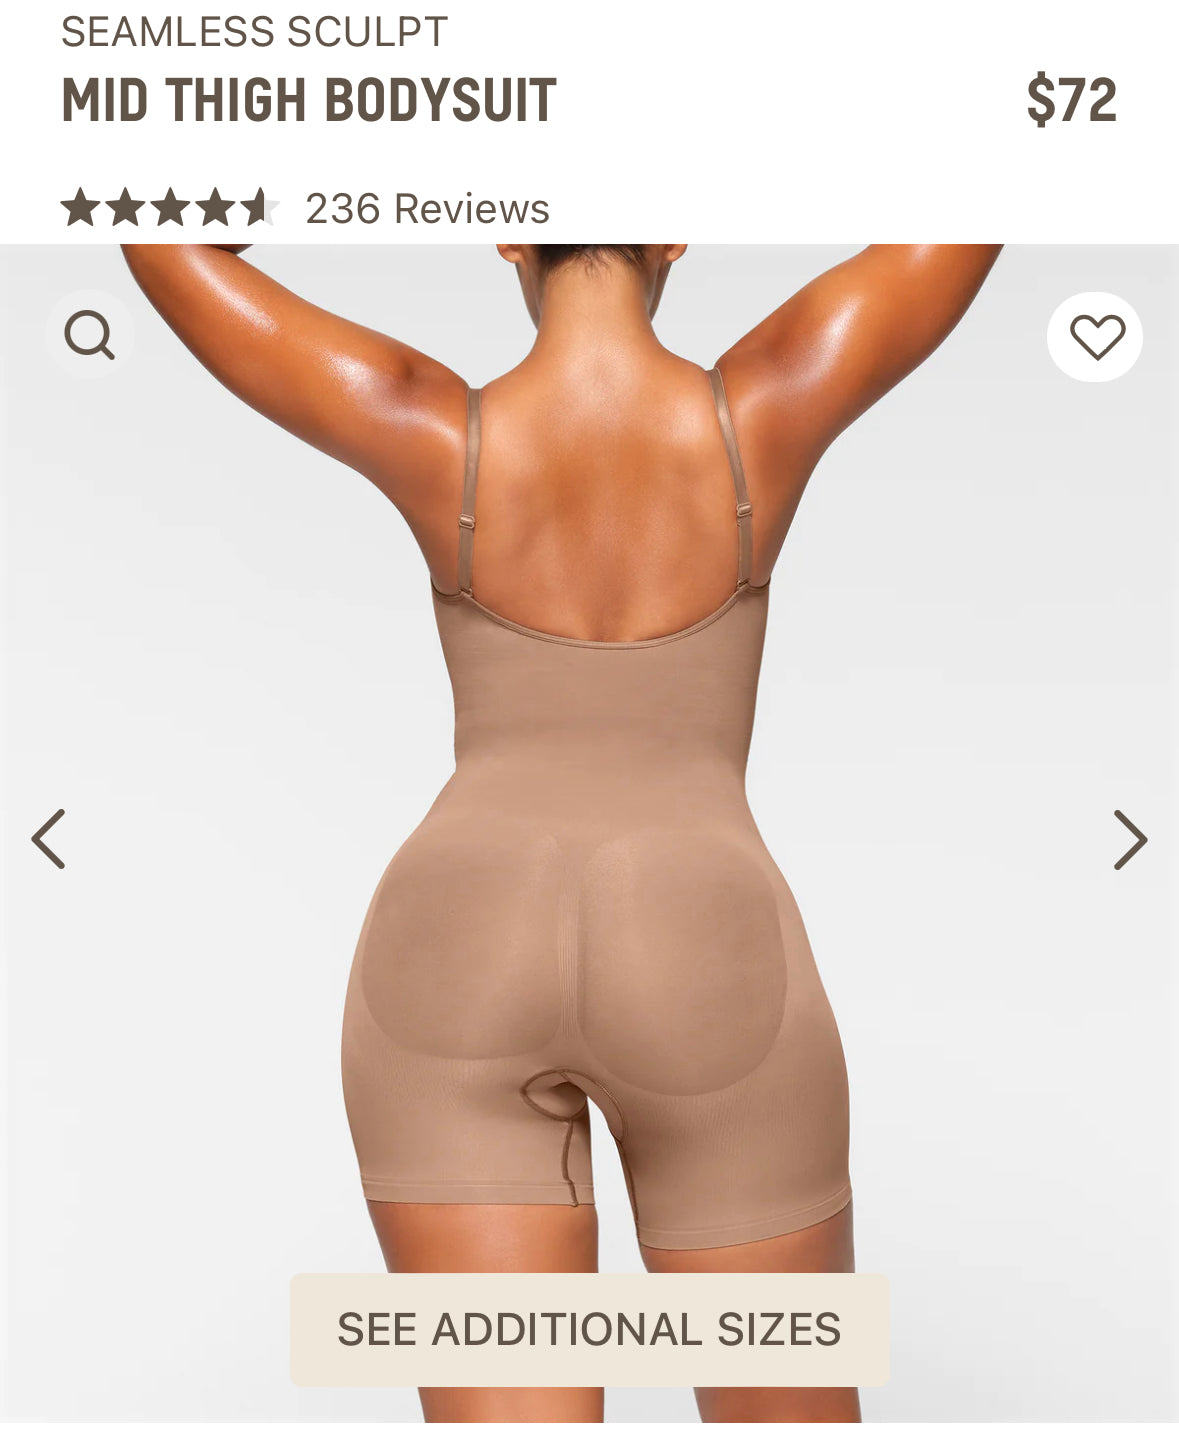 SKIMS REVIEW + HOW TO STYLE: SEAMLESS SCULPTING MID THIGH BODY SUIT 